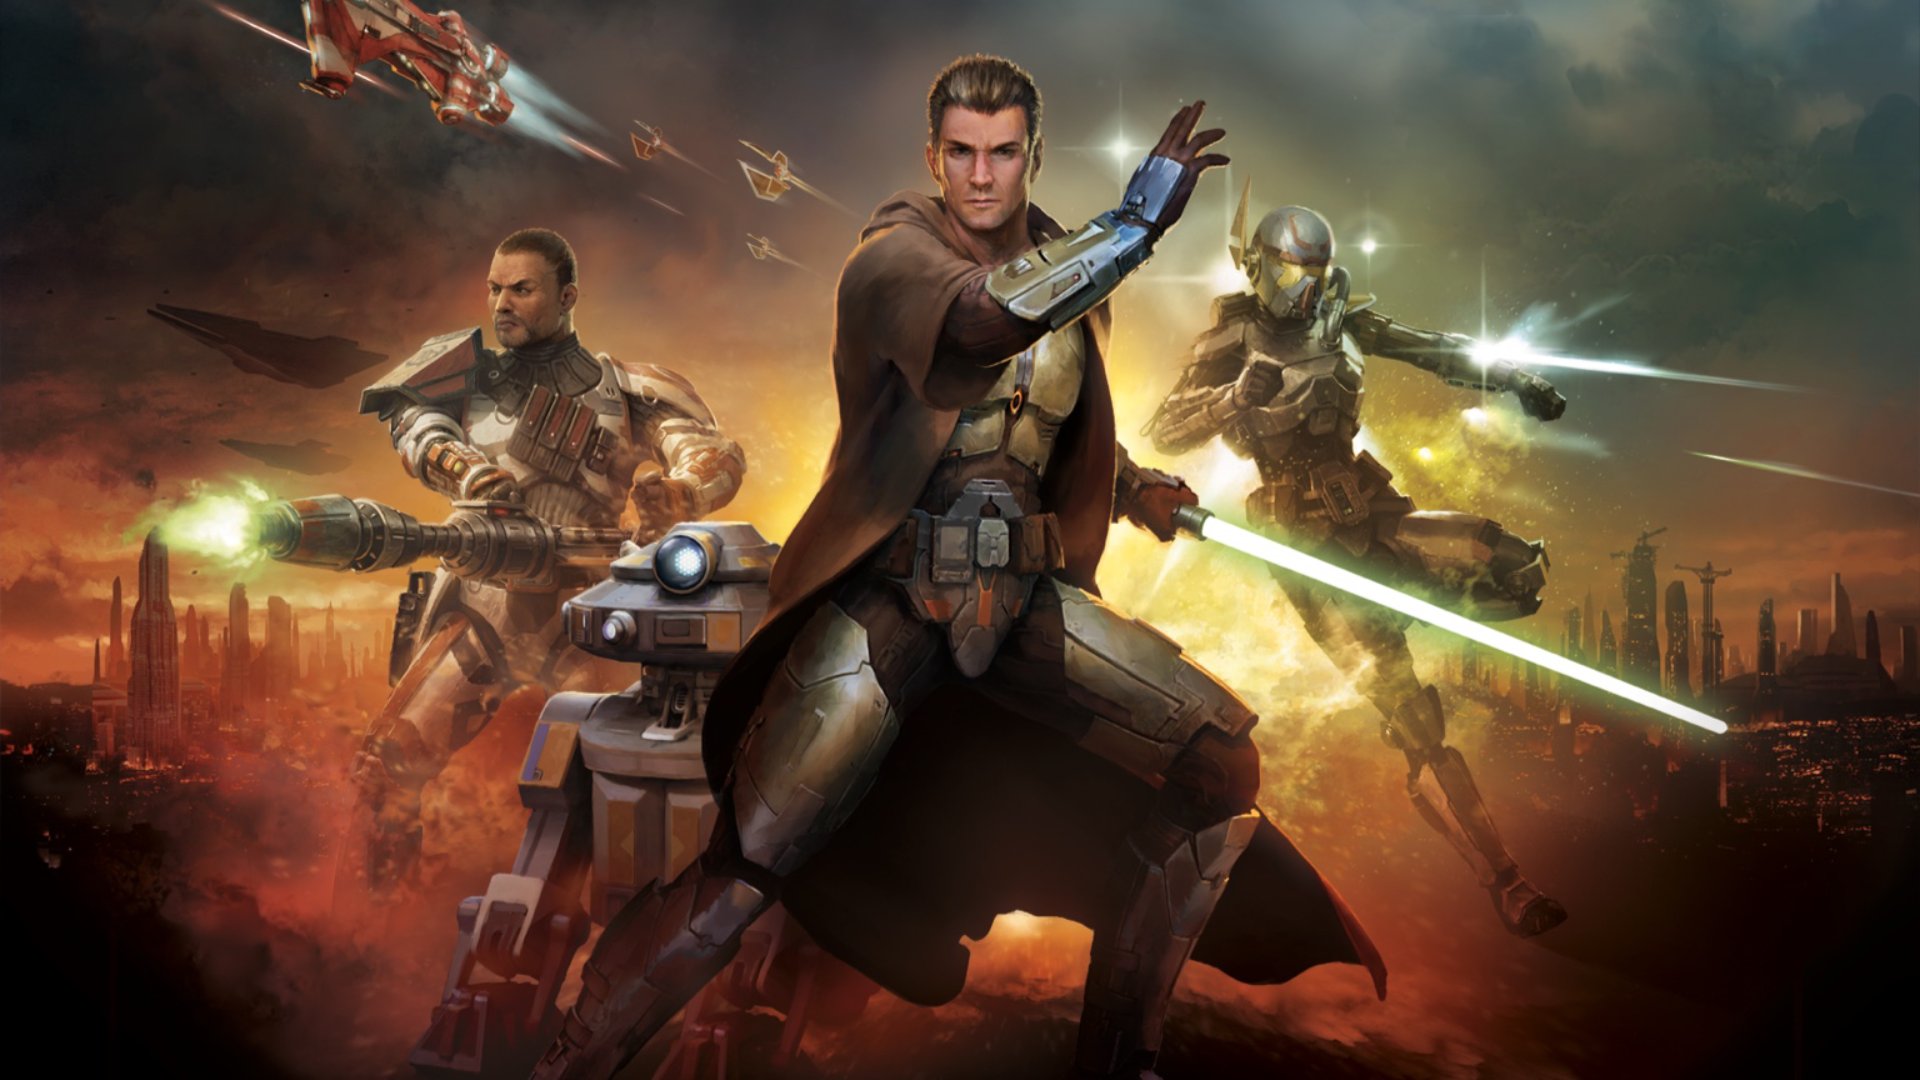 best free games: three star Wars characters and a droid battling off-screen enemies